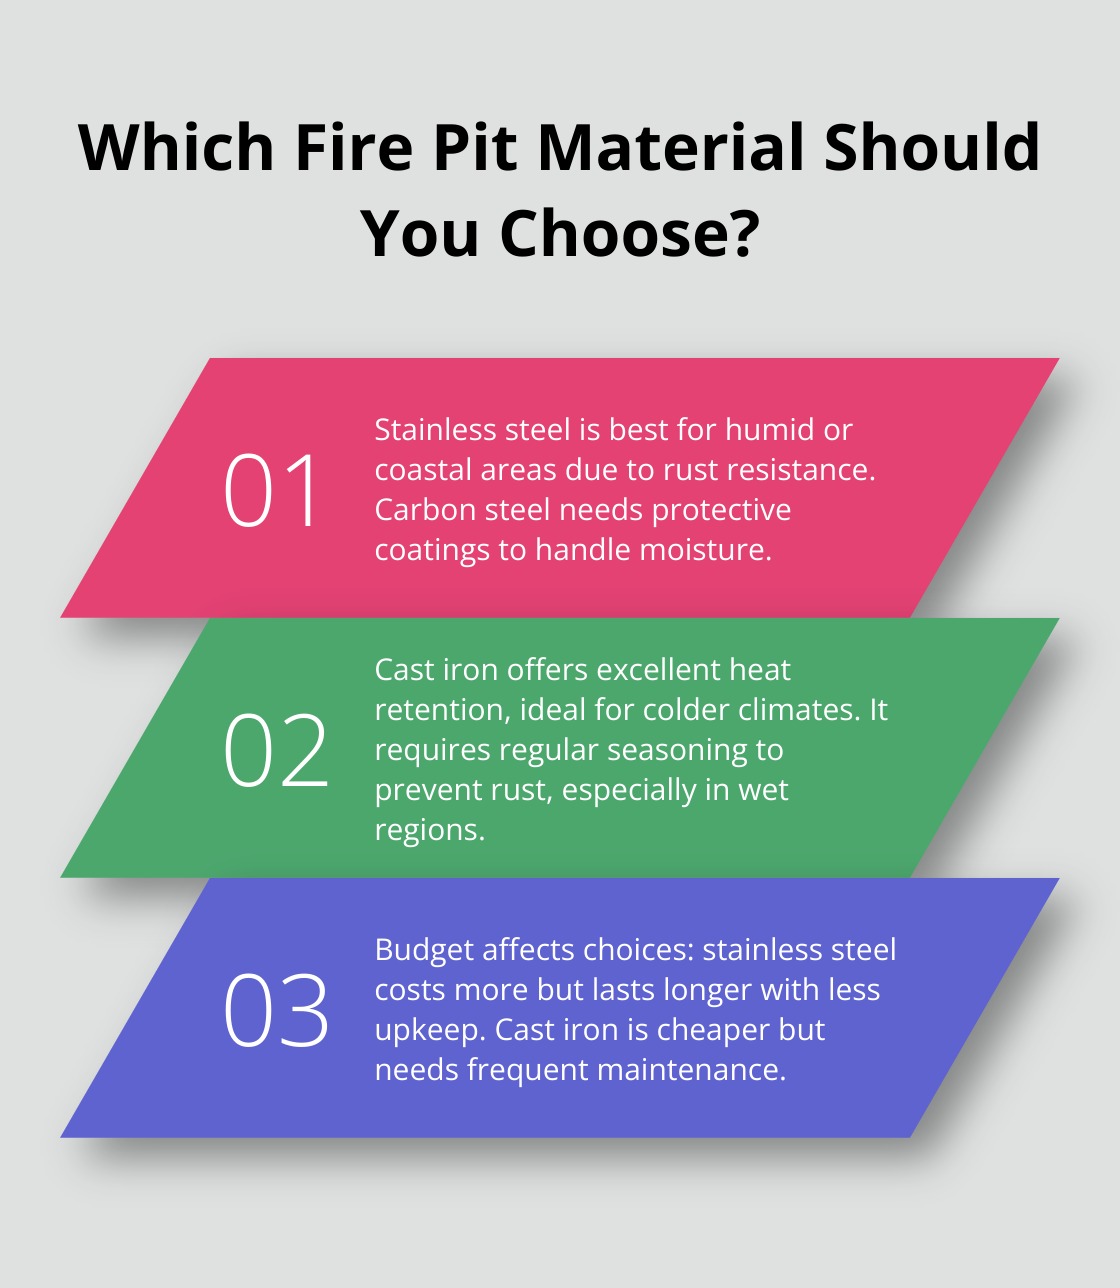 Fact - Which Fire Pit Material Should You Choose?